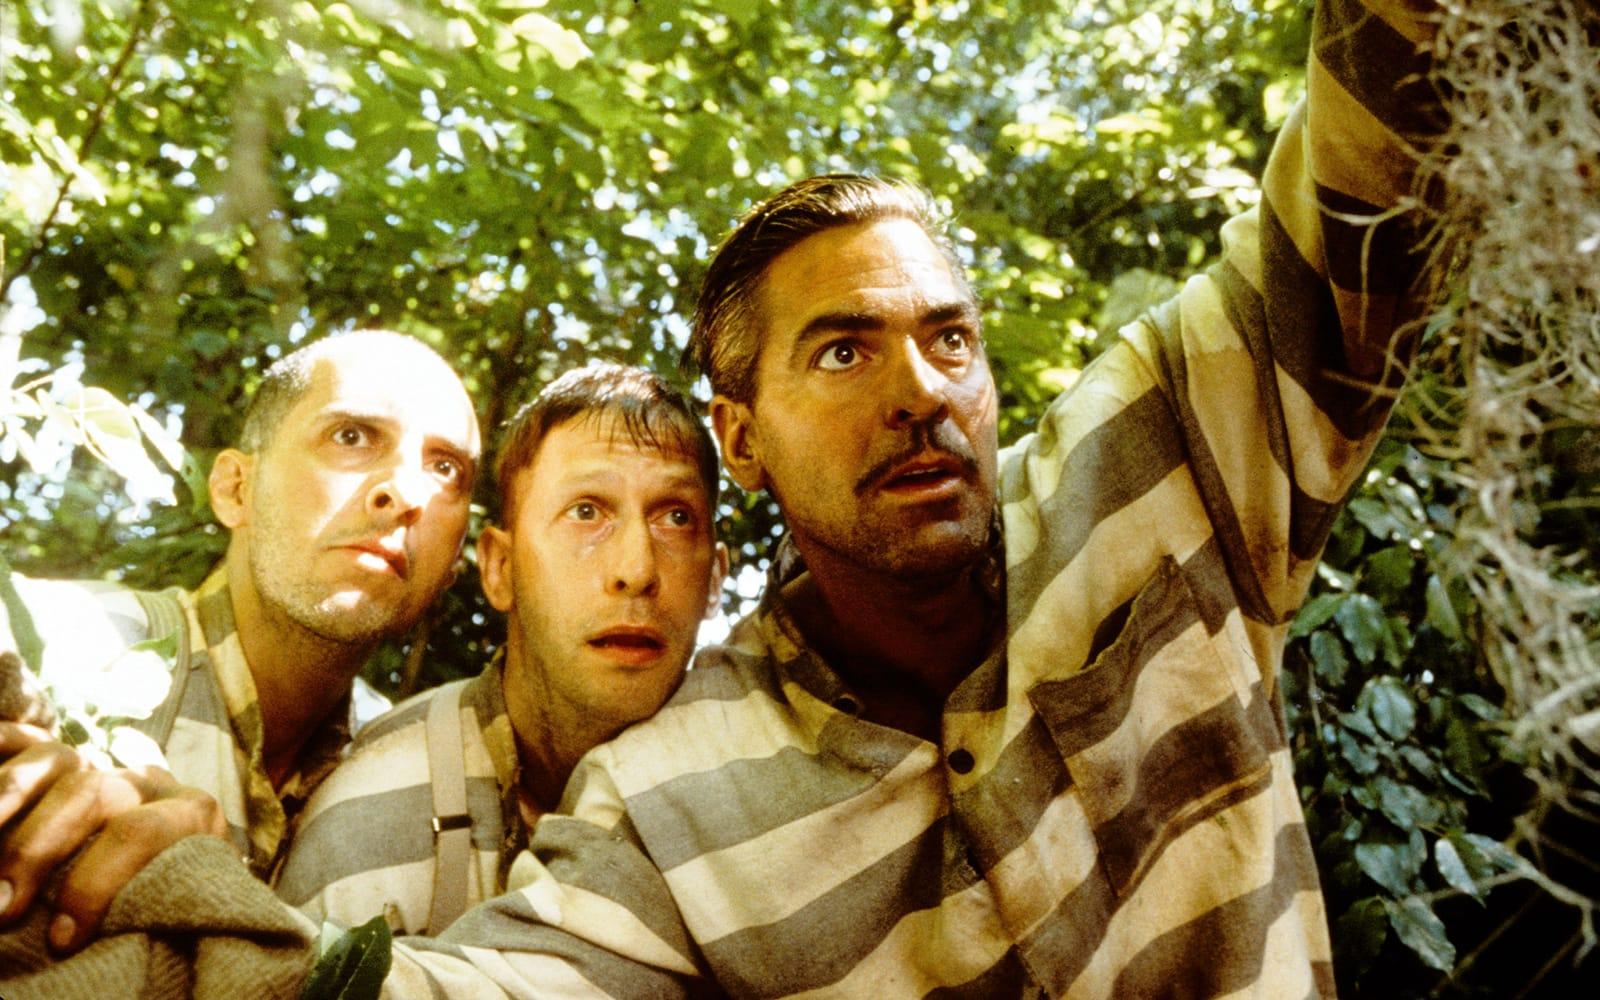 O Brother, Where Art Thou? - The Coen Brothers